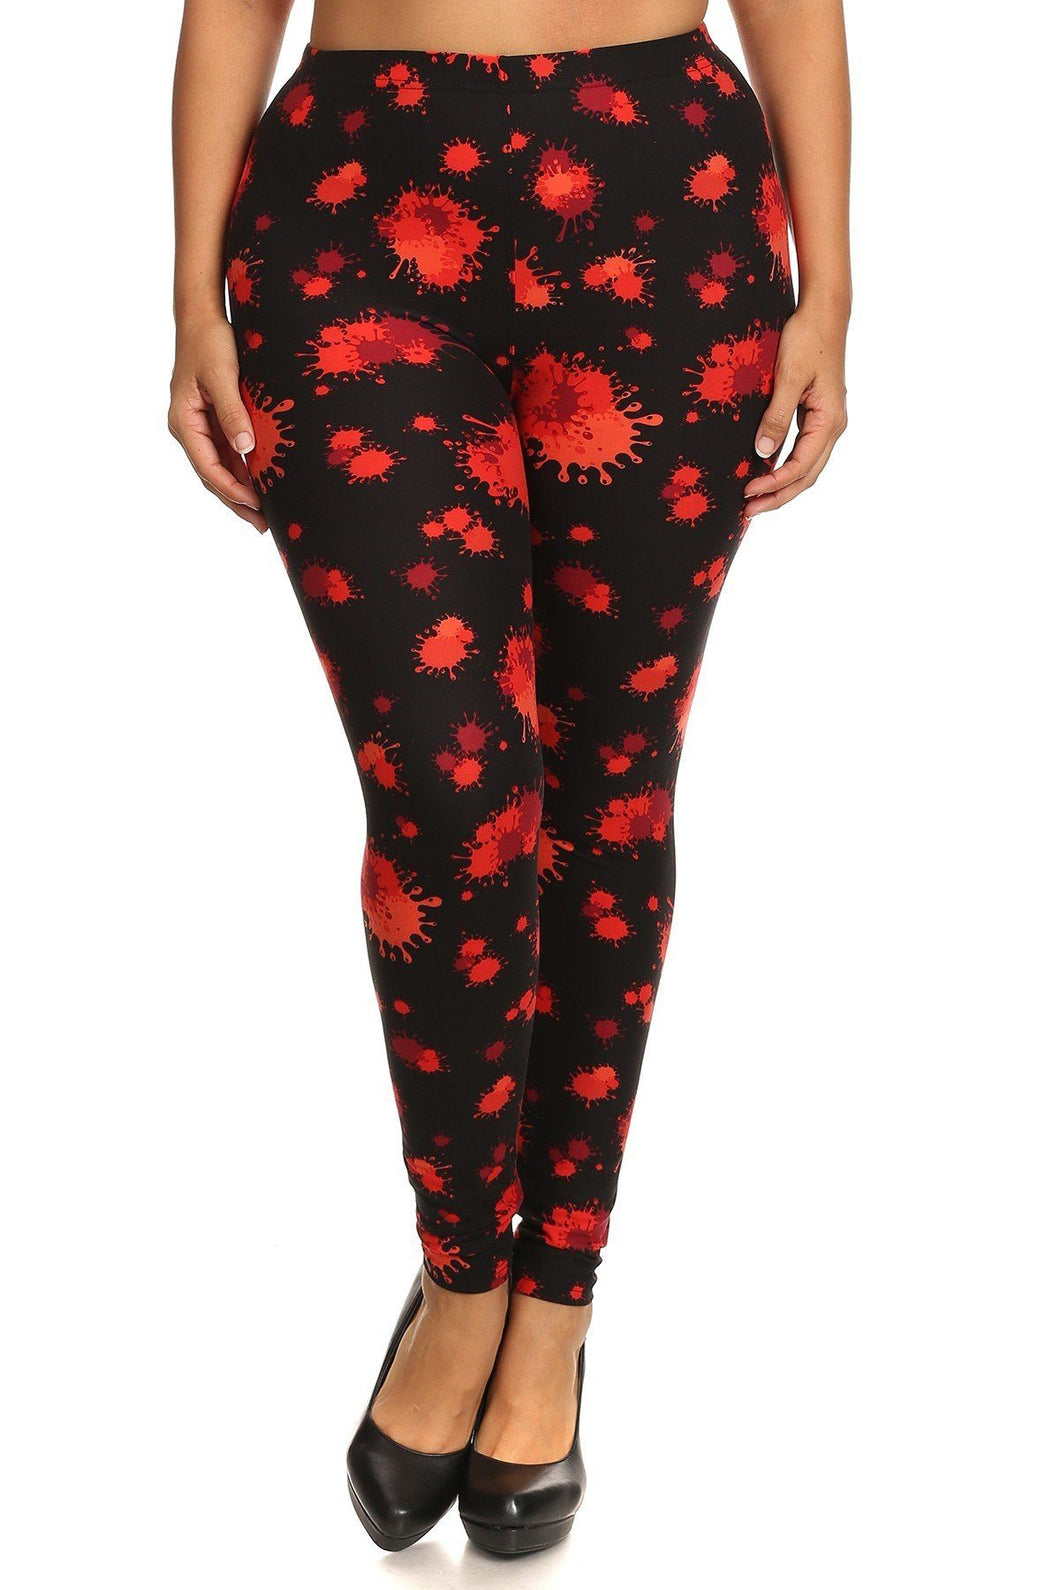 Plus Size Splatter Print, Full Length Leggings In A Slim Fitting Style With A Banded High Waist